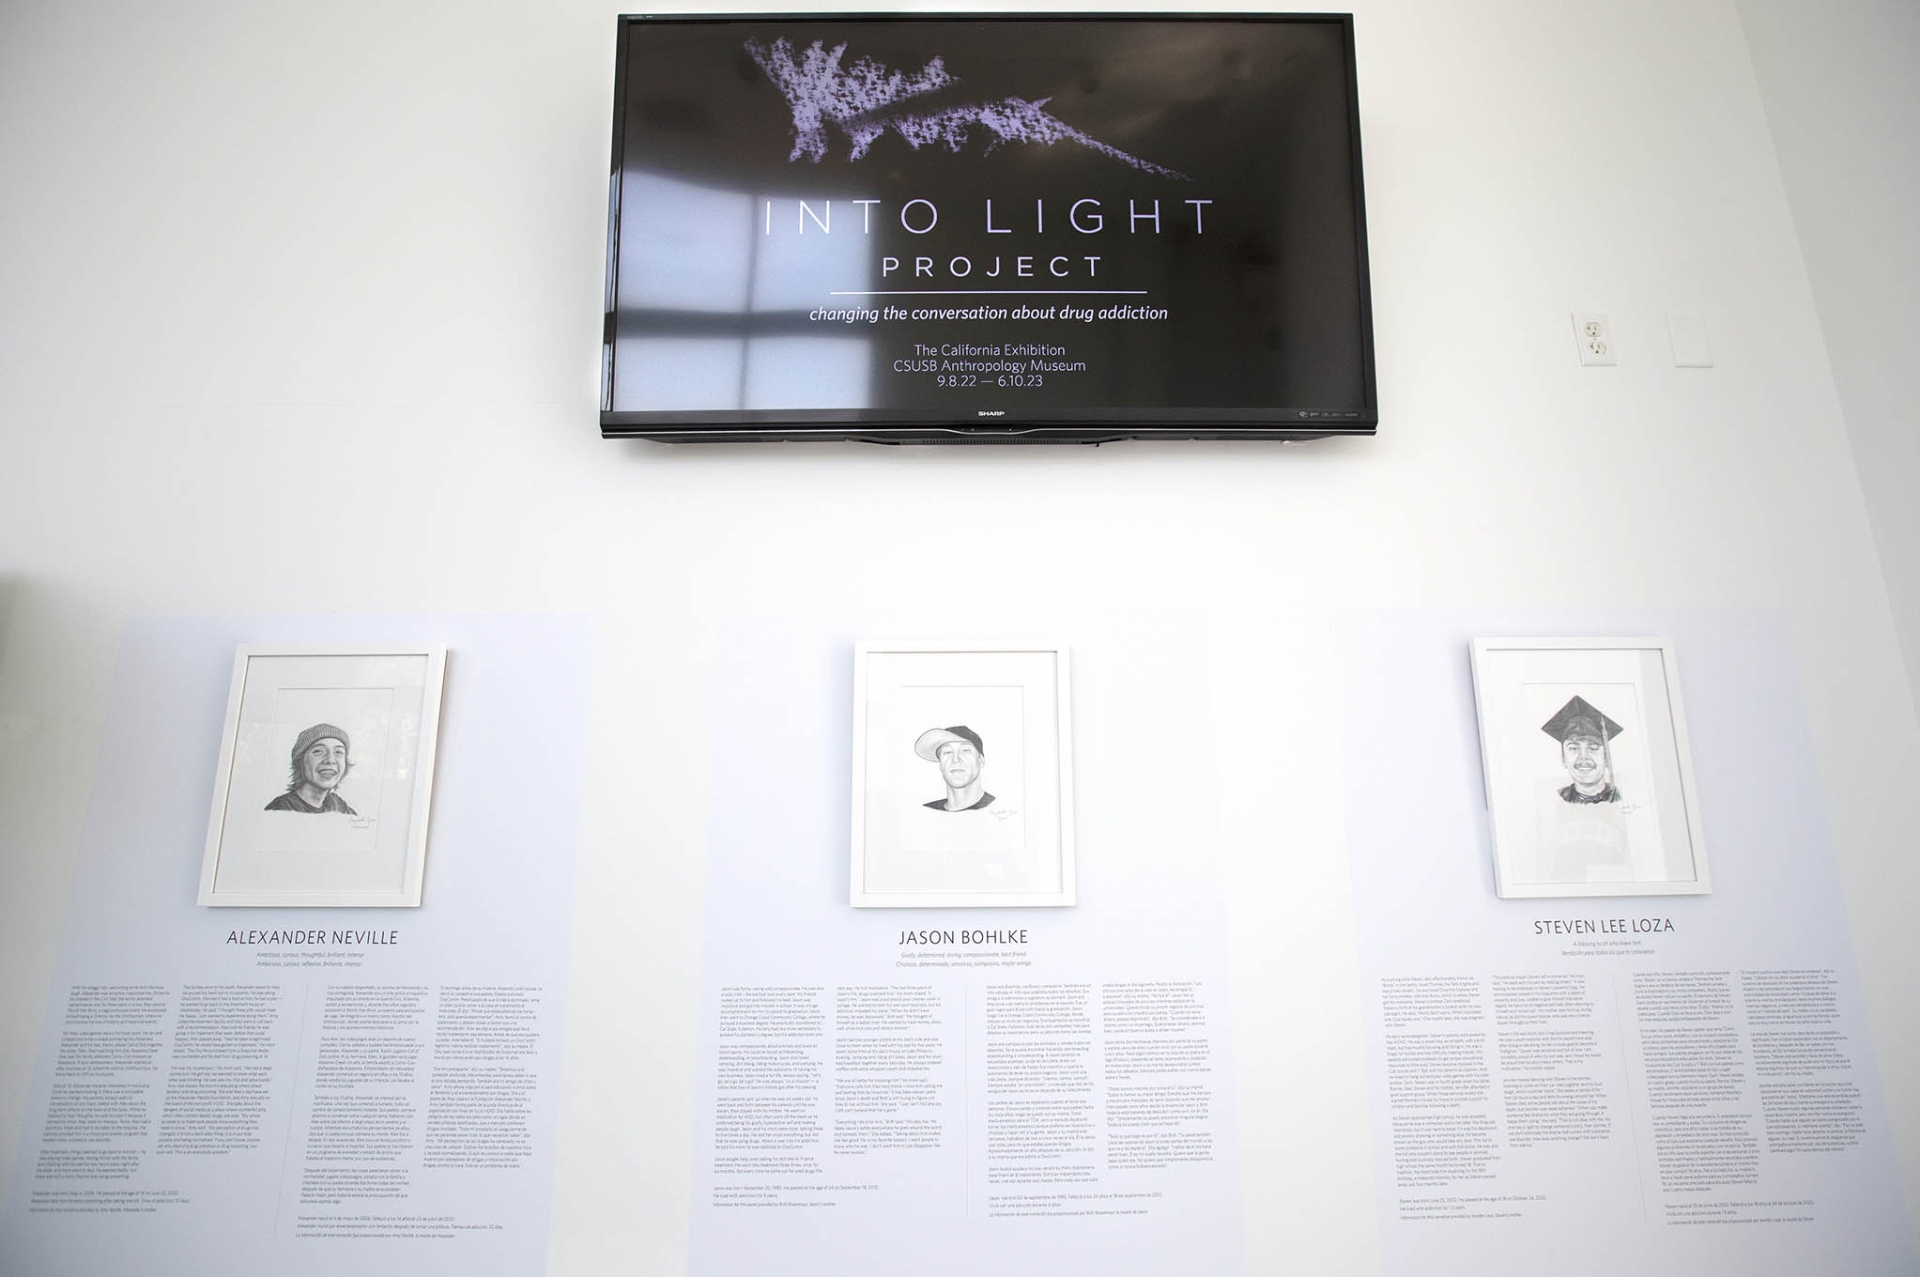 A third view of the INTO LIGHT Project's exhibit at the CSUSB Anthropology Museum.